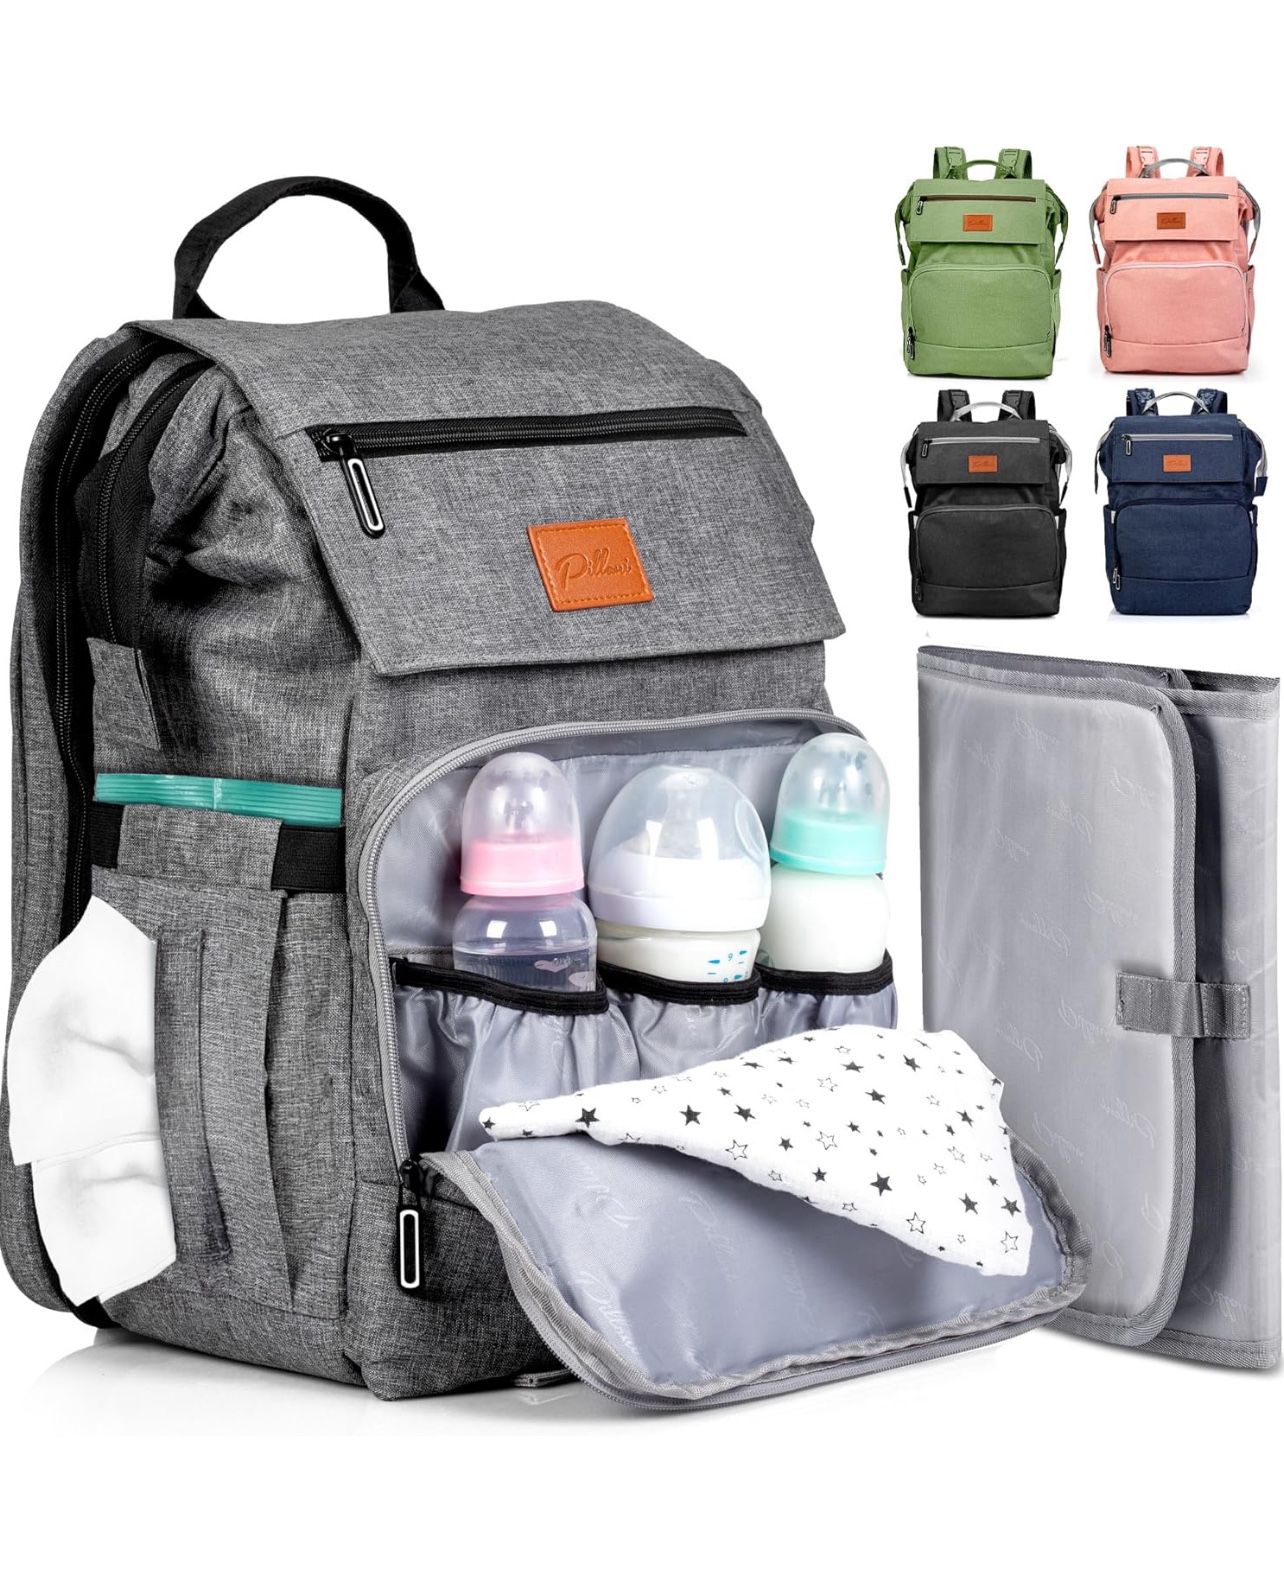 Baby Diaper Bag Backpack - Baby Bag for Boys & Girls, Diaper Backpack - Large Travel Diaper Bags w/Changing Pad 